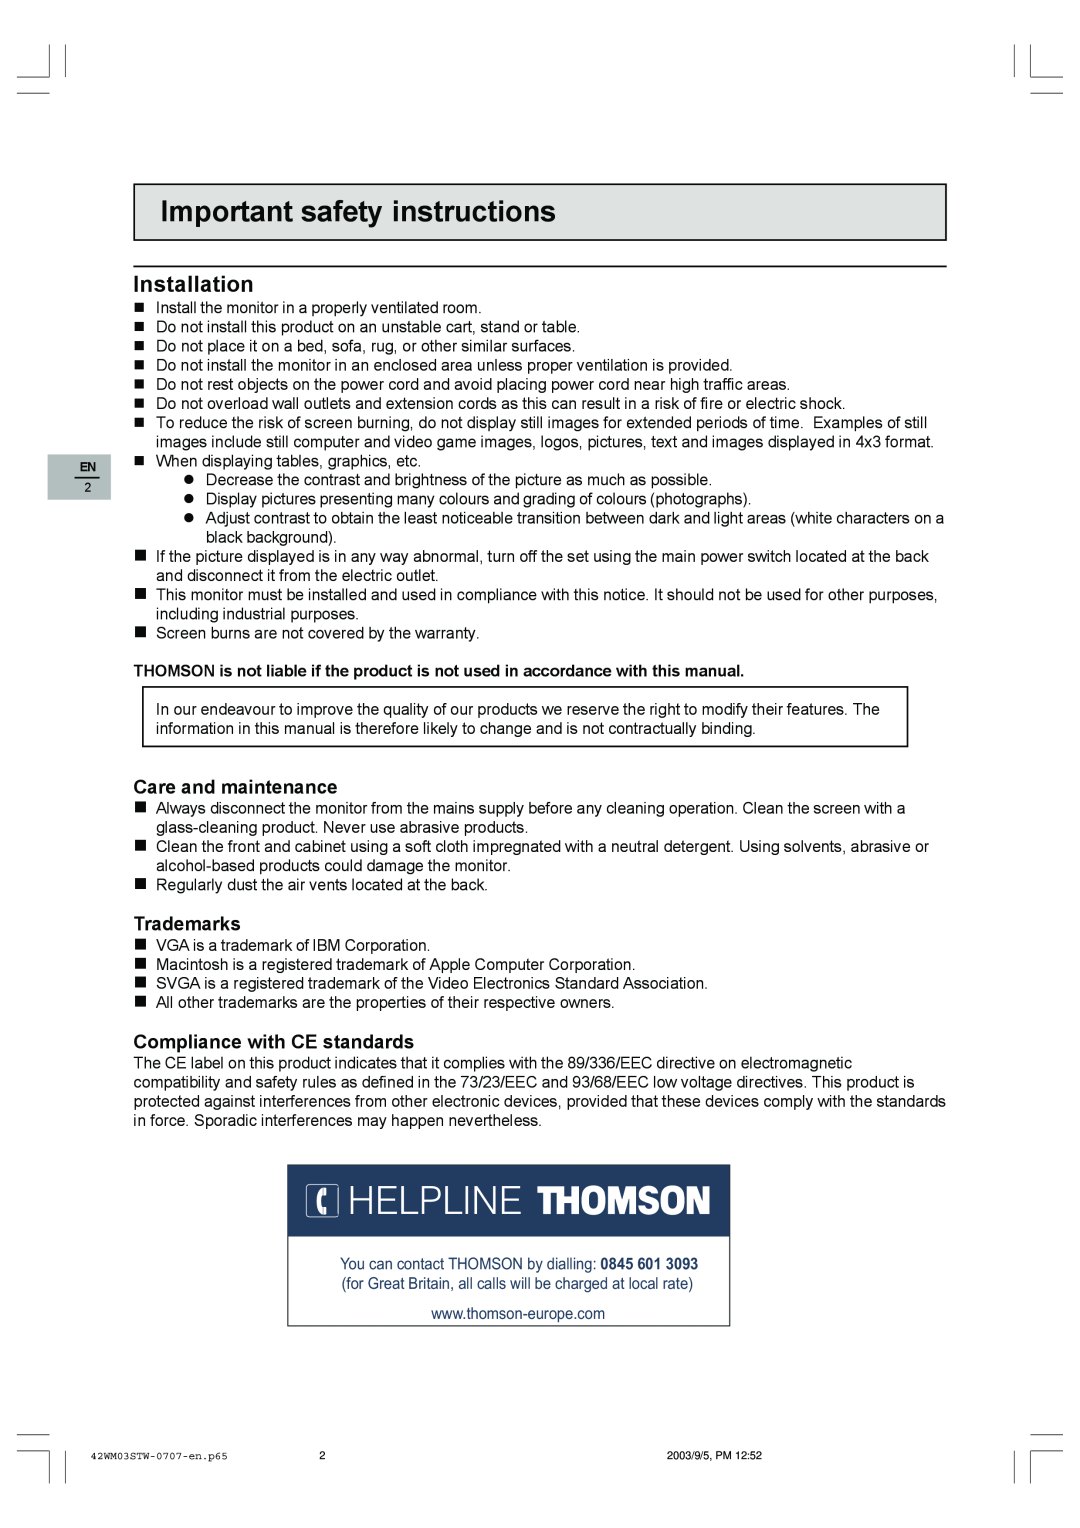 Technicolor - Thomson 42WM03STW-0707 Installation, Care and maintenance, Trademarks, Compliance with CE standards 